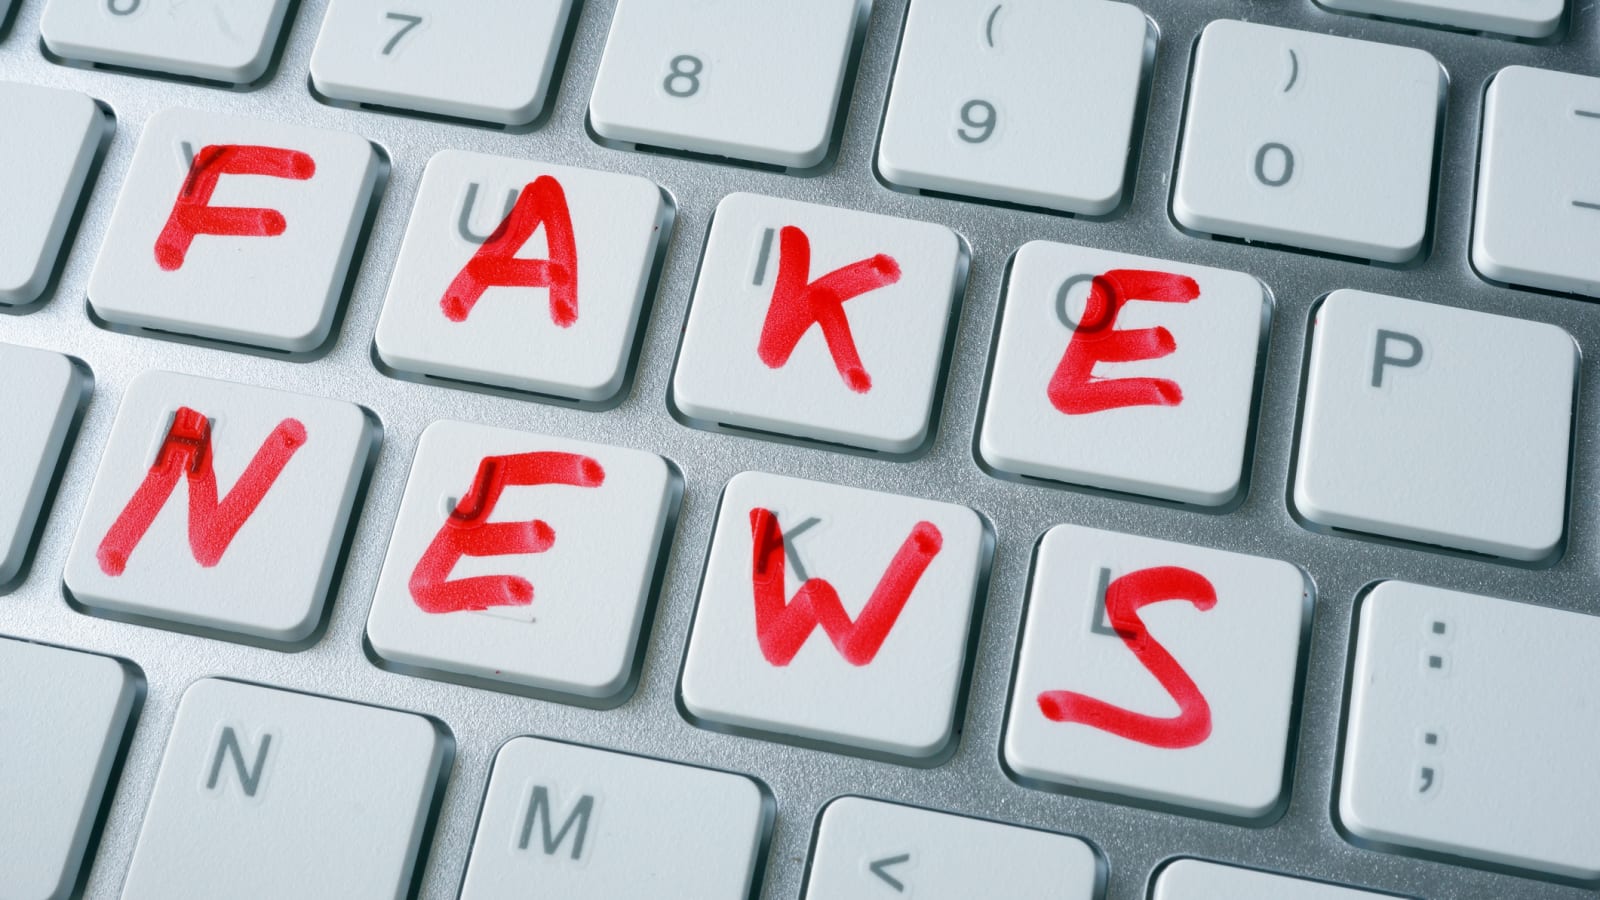 How to spot fake news in your social media feed